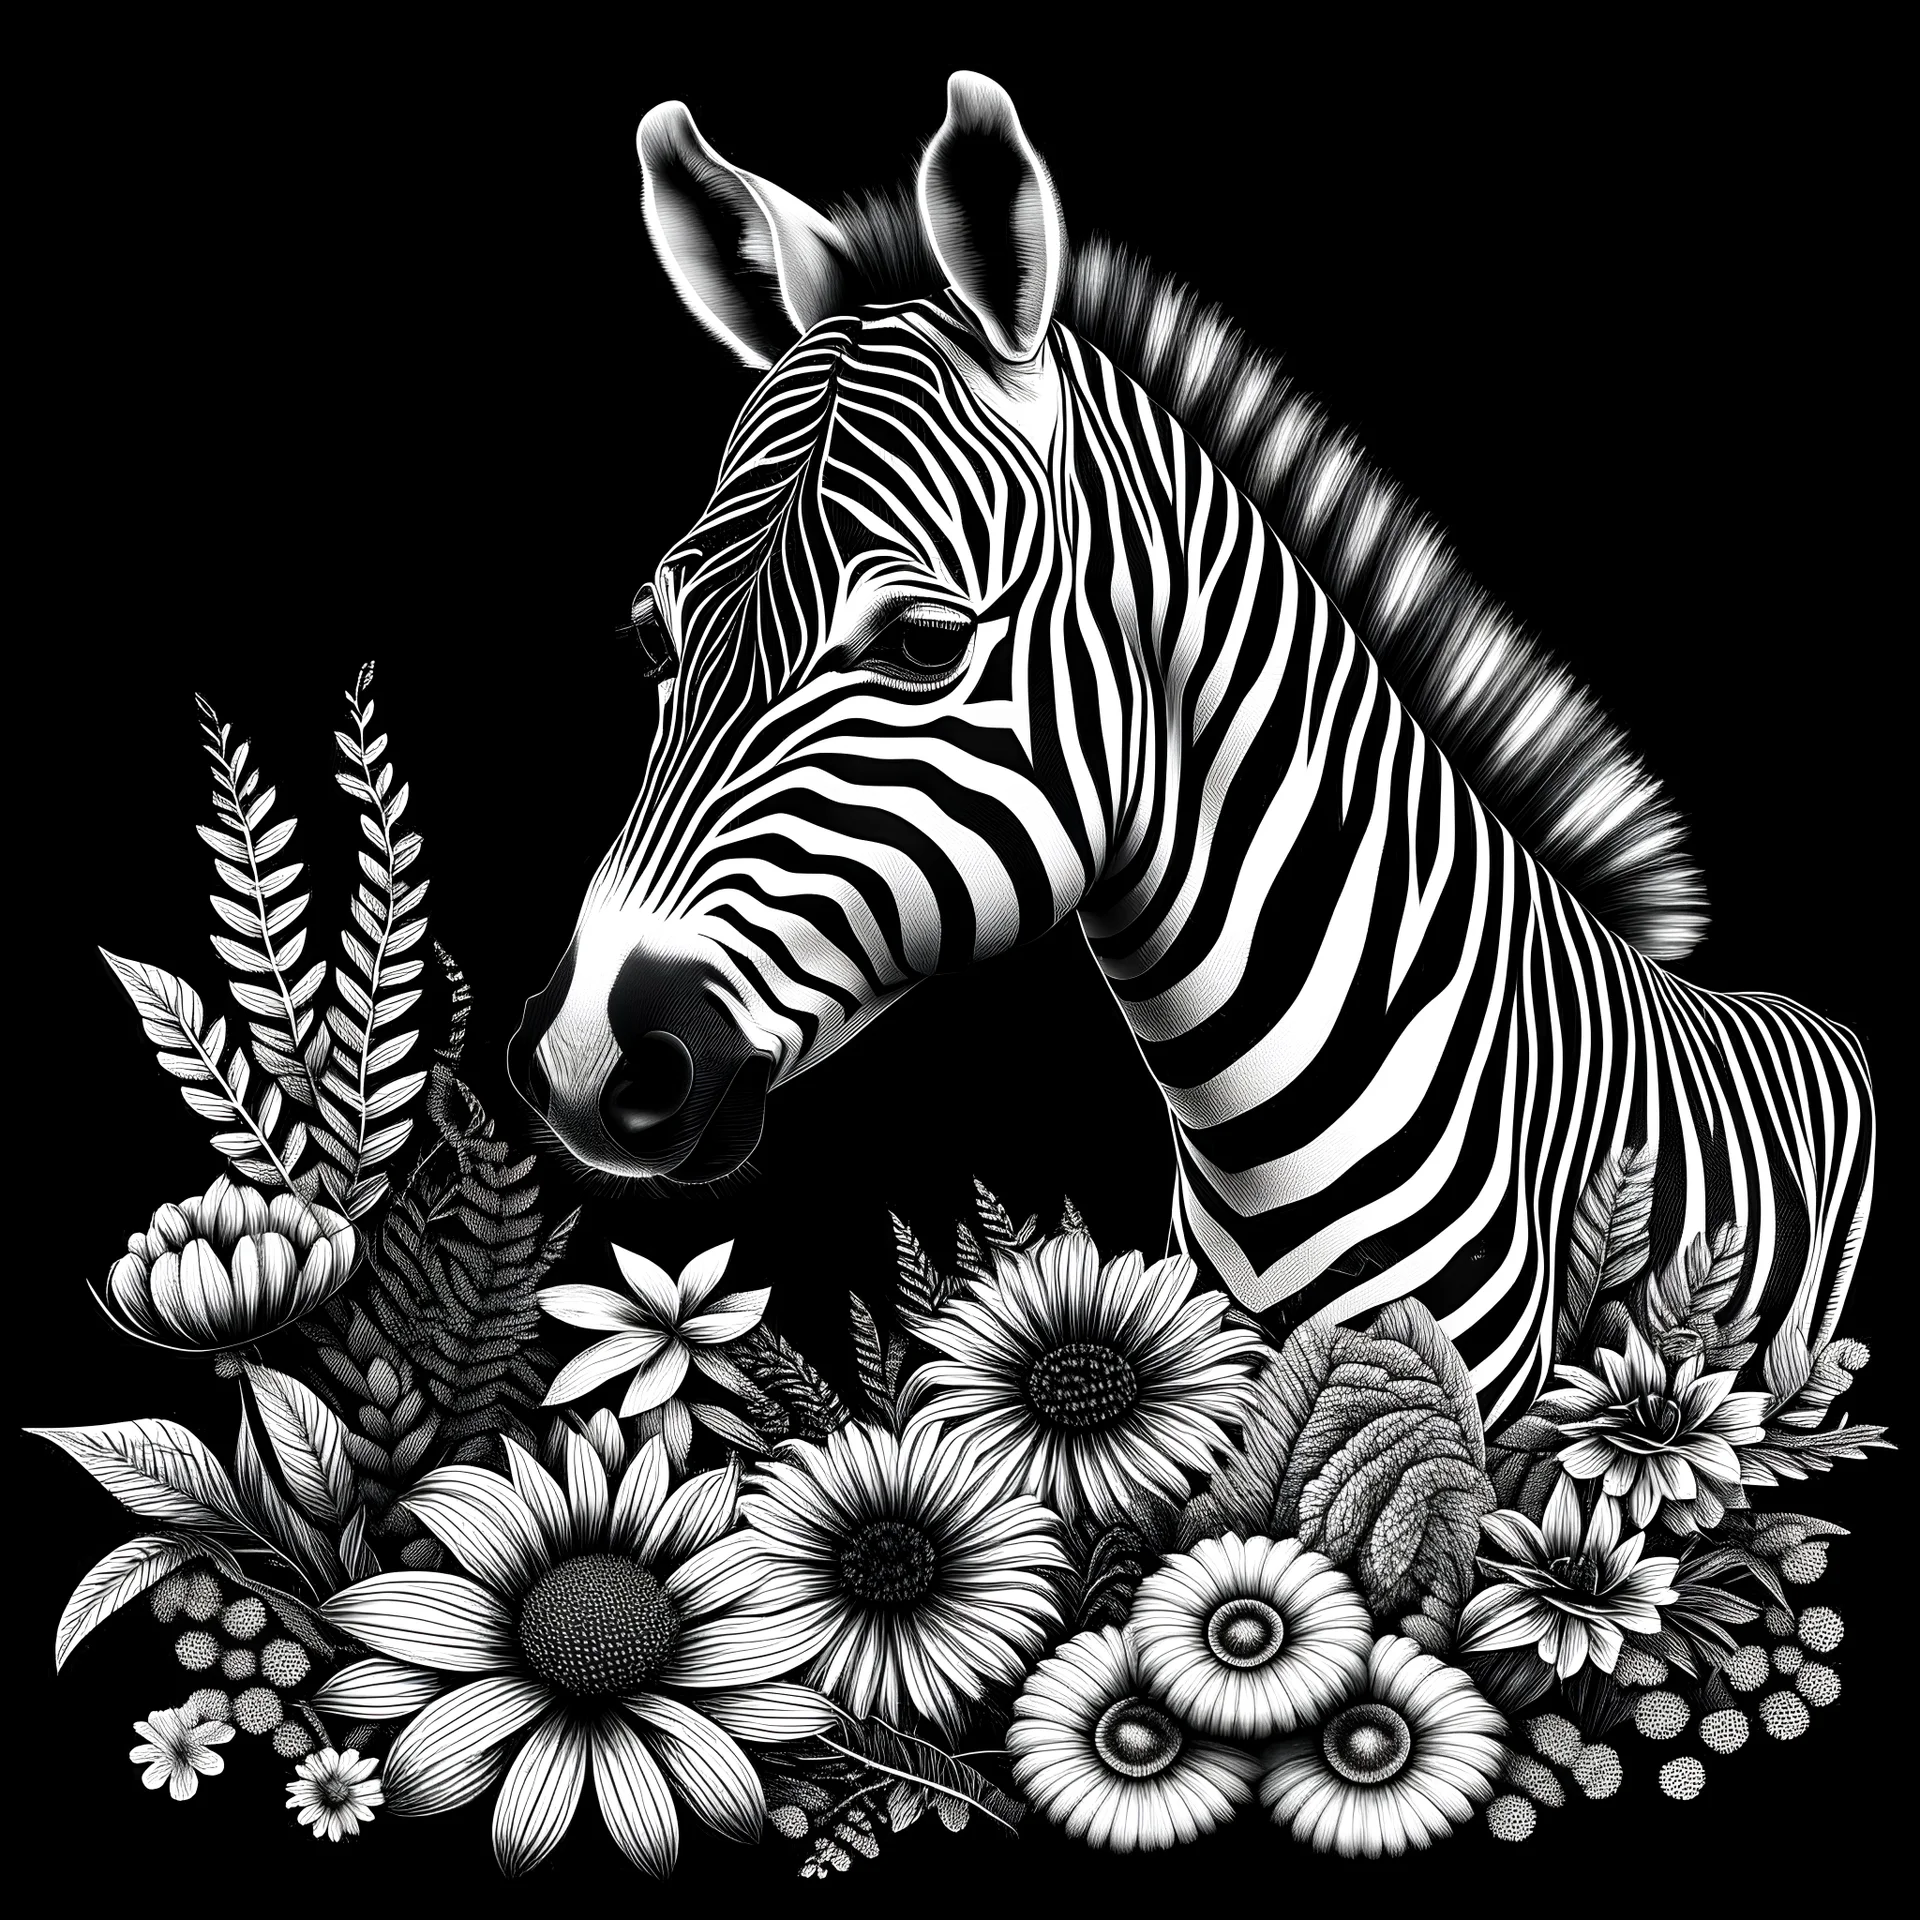 zebra between seeds and big flowers black background .black and white colors. easy for coloring . with grayscale